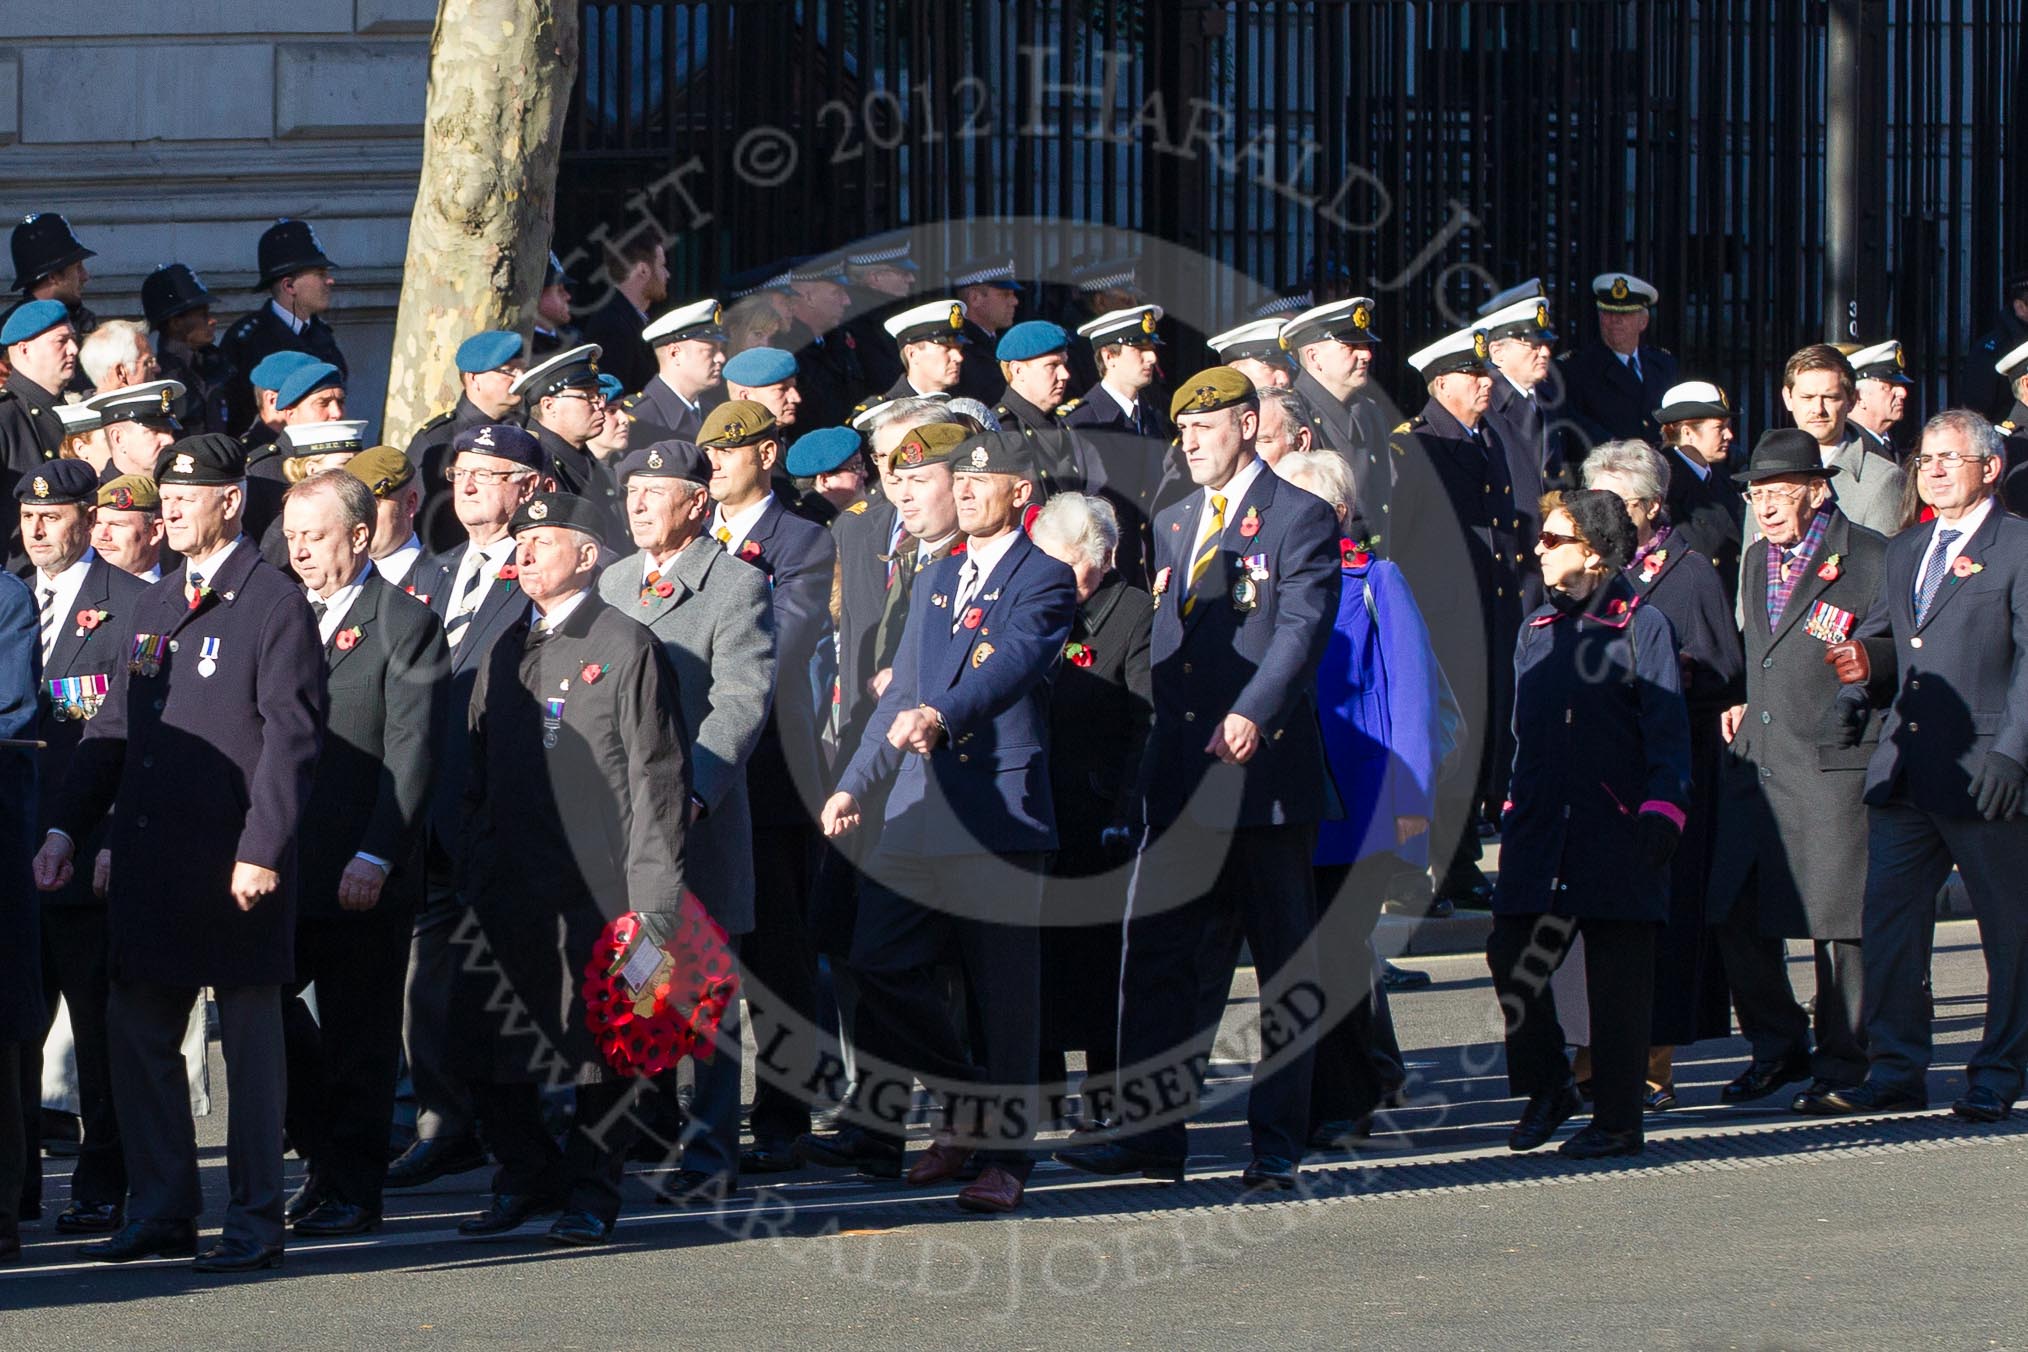 Remembrance Sunday 2012 Cenotaph March Past: Group A1/2/3 - Princess of Wales's Royal Regiment/Prince of Wales's Leinster Regiment (Royal Canadians) Regimental Association/Royal East Kent Regiment (The Buffs) Past & Present Association..
Whitehall, Cenotaph,
London SW1,

United Kingdom,
on 11 November 2012 at 11:48, image #556